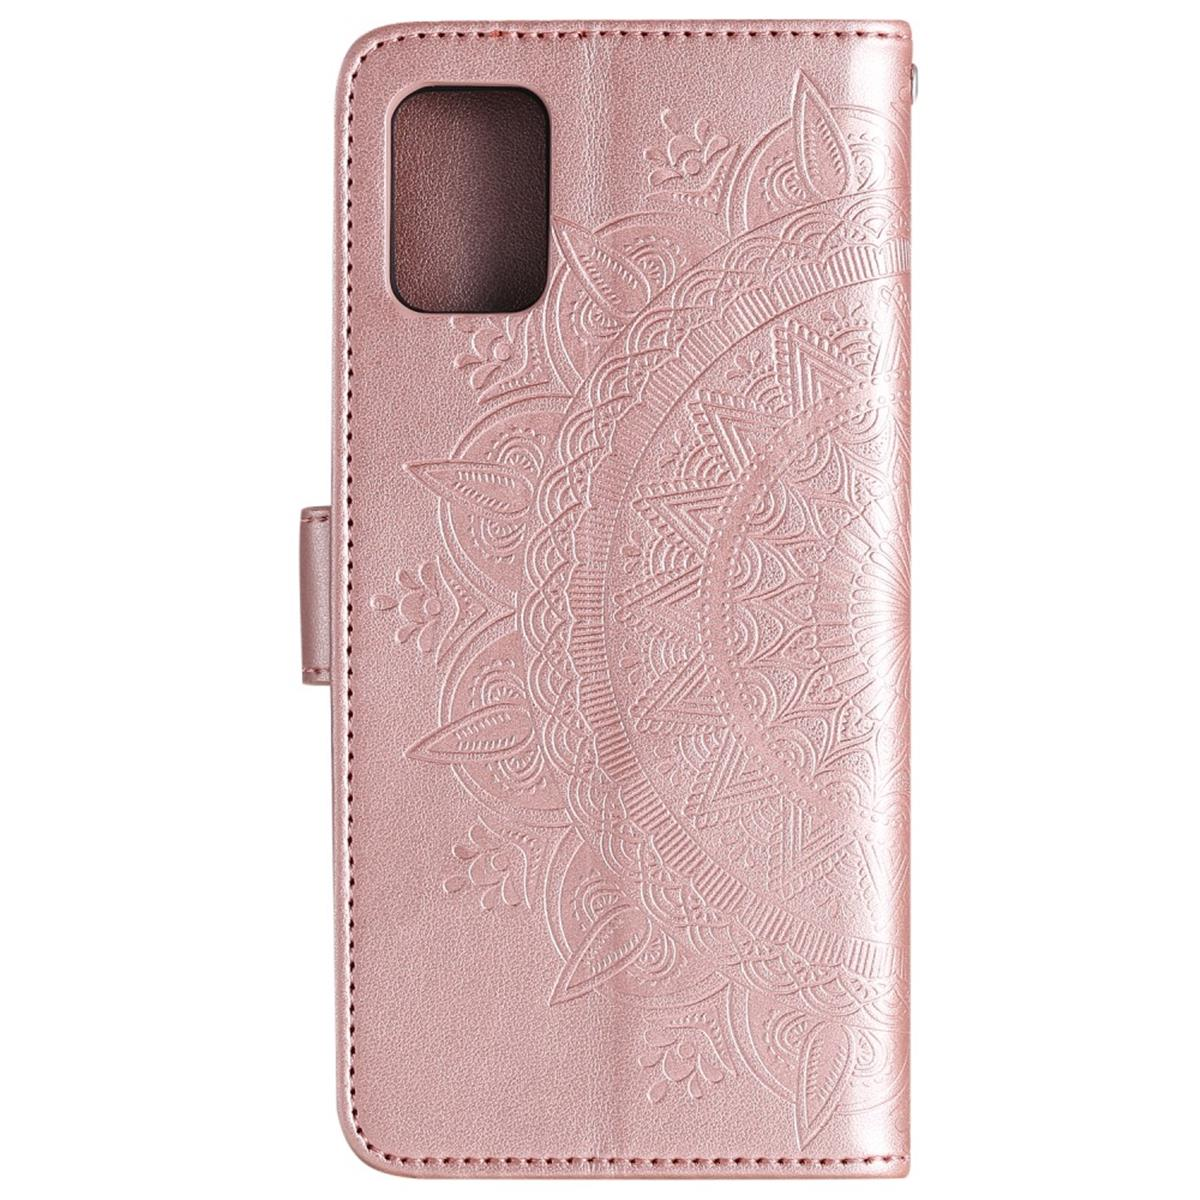 COVERKINGZ Klapphülle mit Samsung, Galaxy Muster, Roségold Mandala Note20, Bookcover,